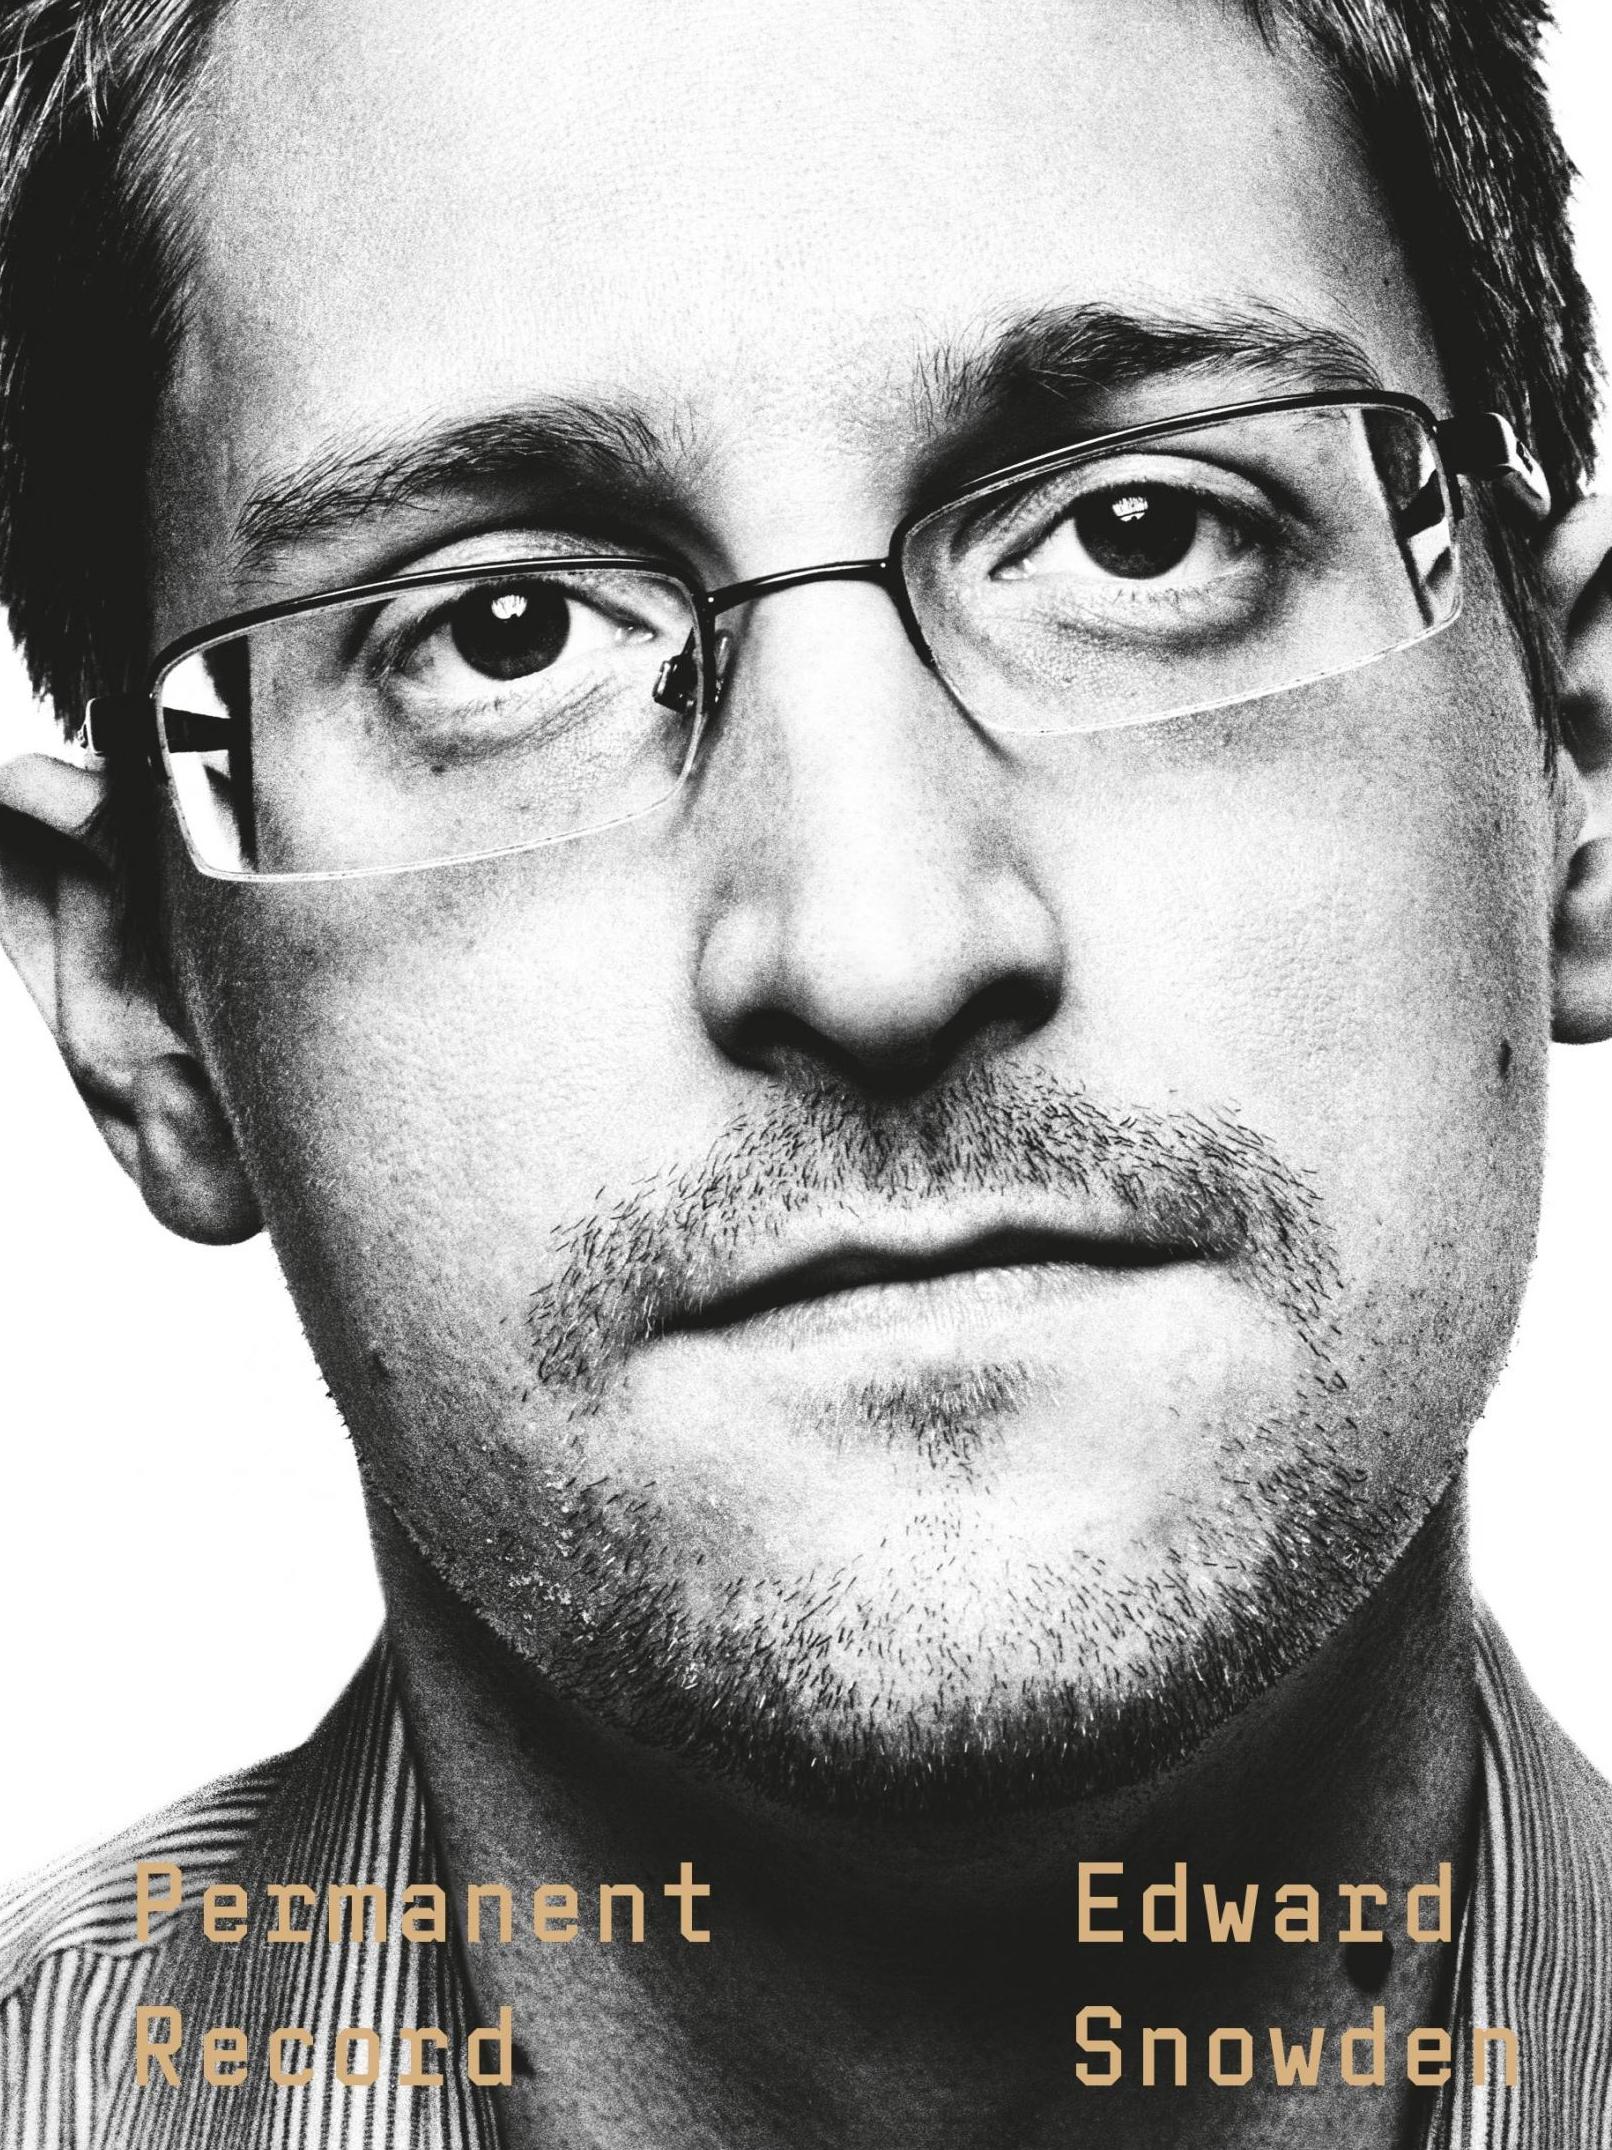 Edward Snowden's memoir, 'Permanent Record', will be published on 17 September, 2019.